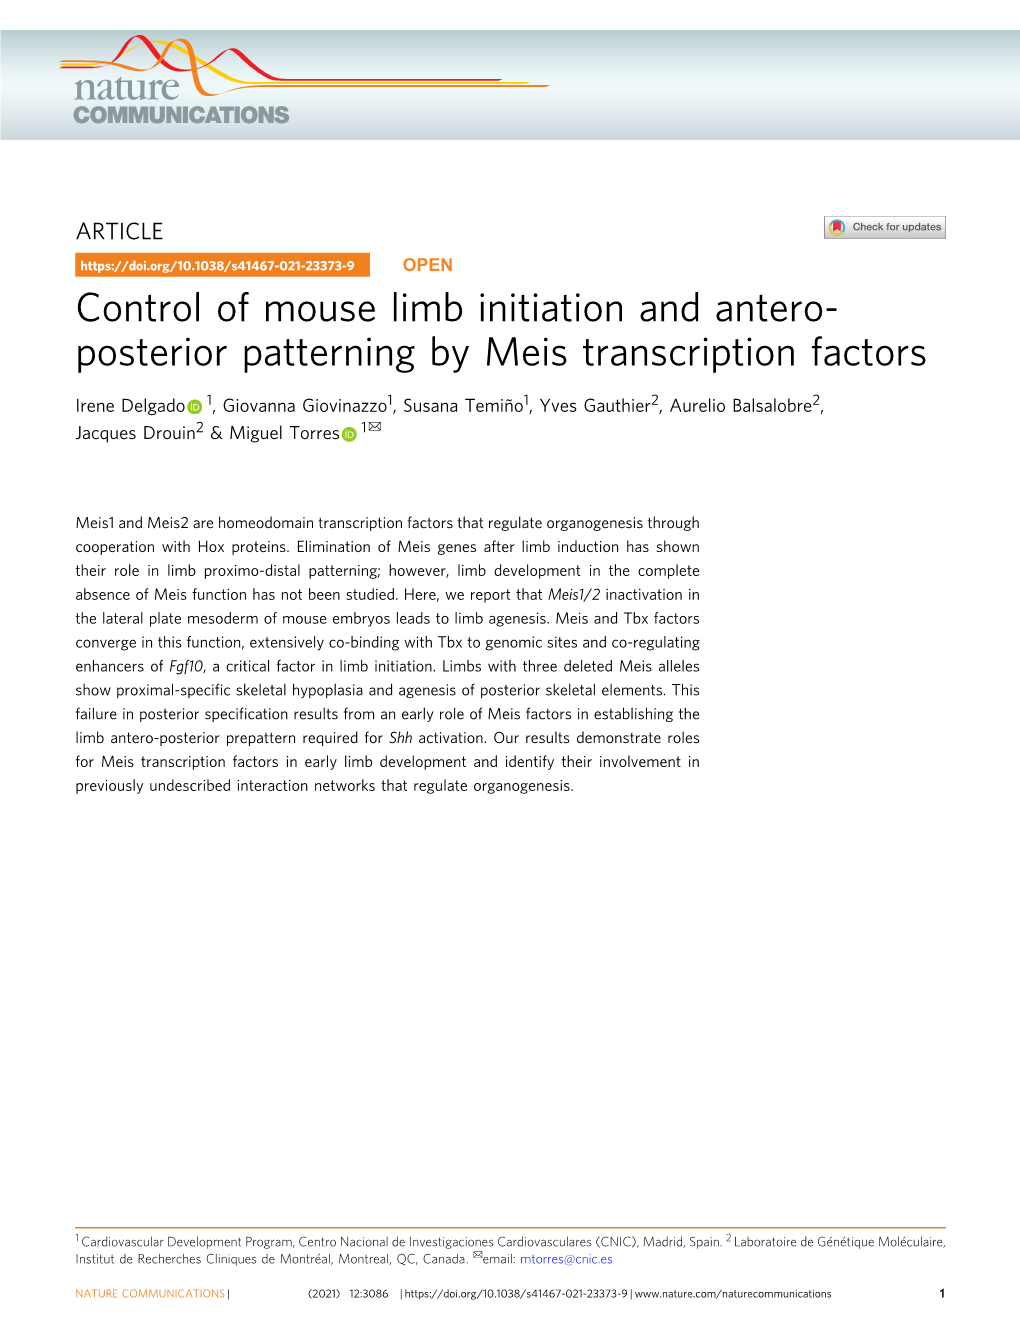 Control of Mouse Limb Initiation and Antero-Posterior Patterning by Meis